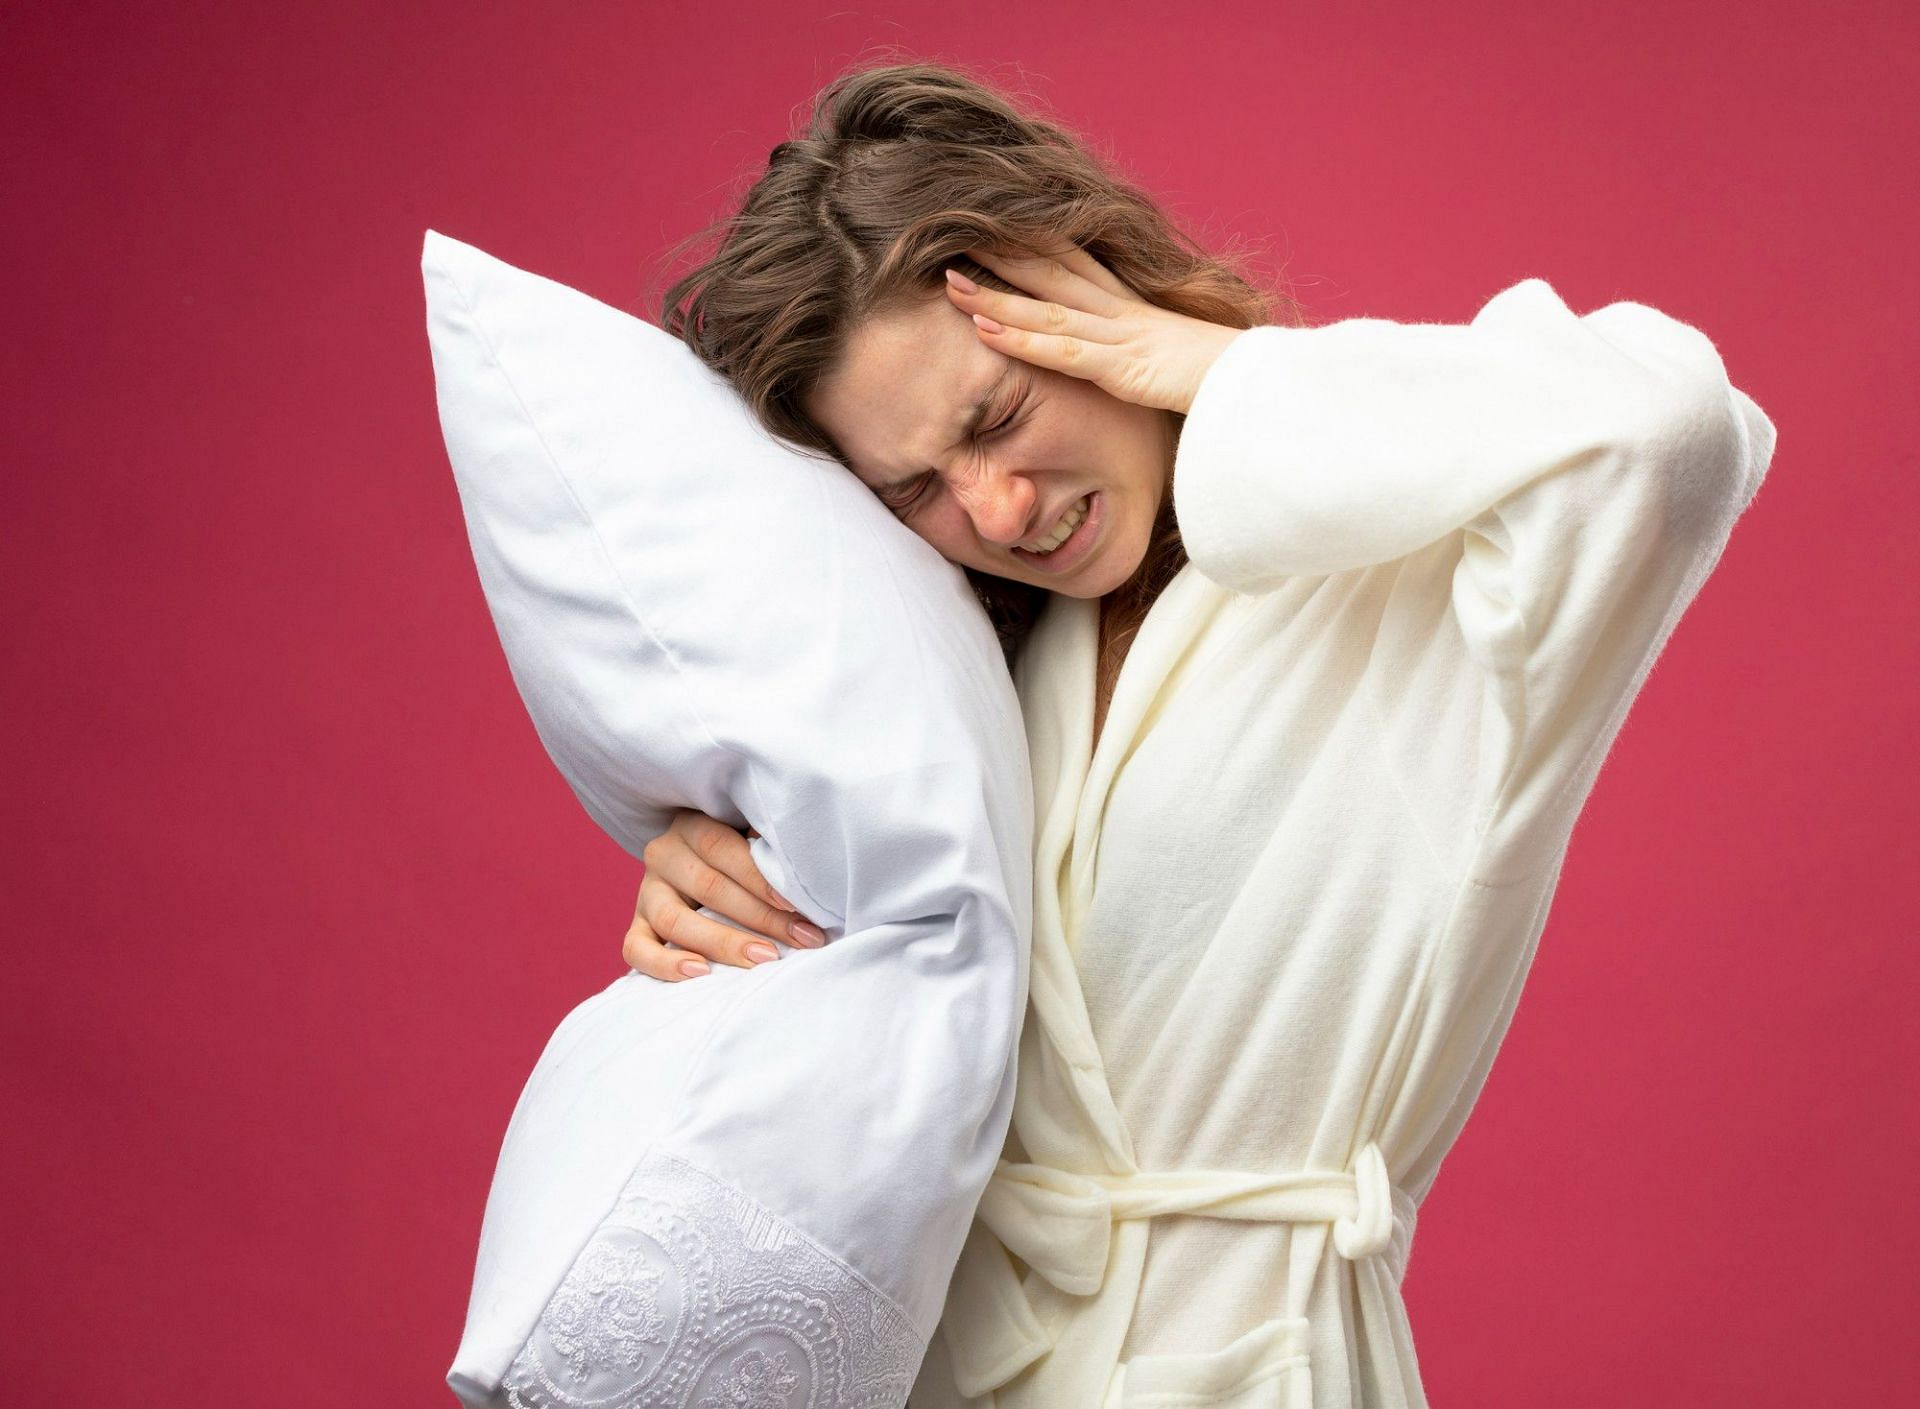 Can you sleep with a concussion? (Image by stockking on Freepik)